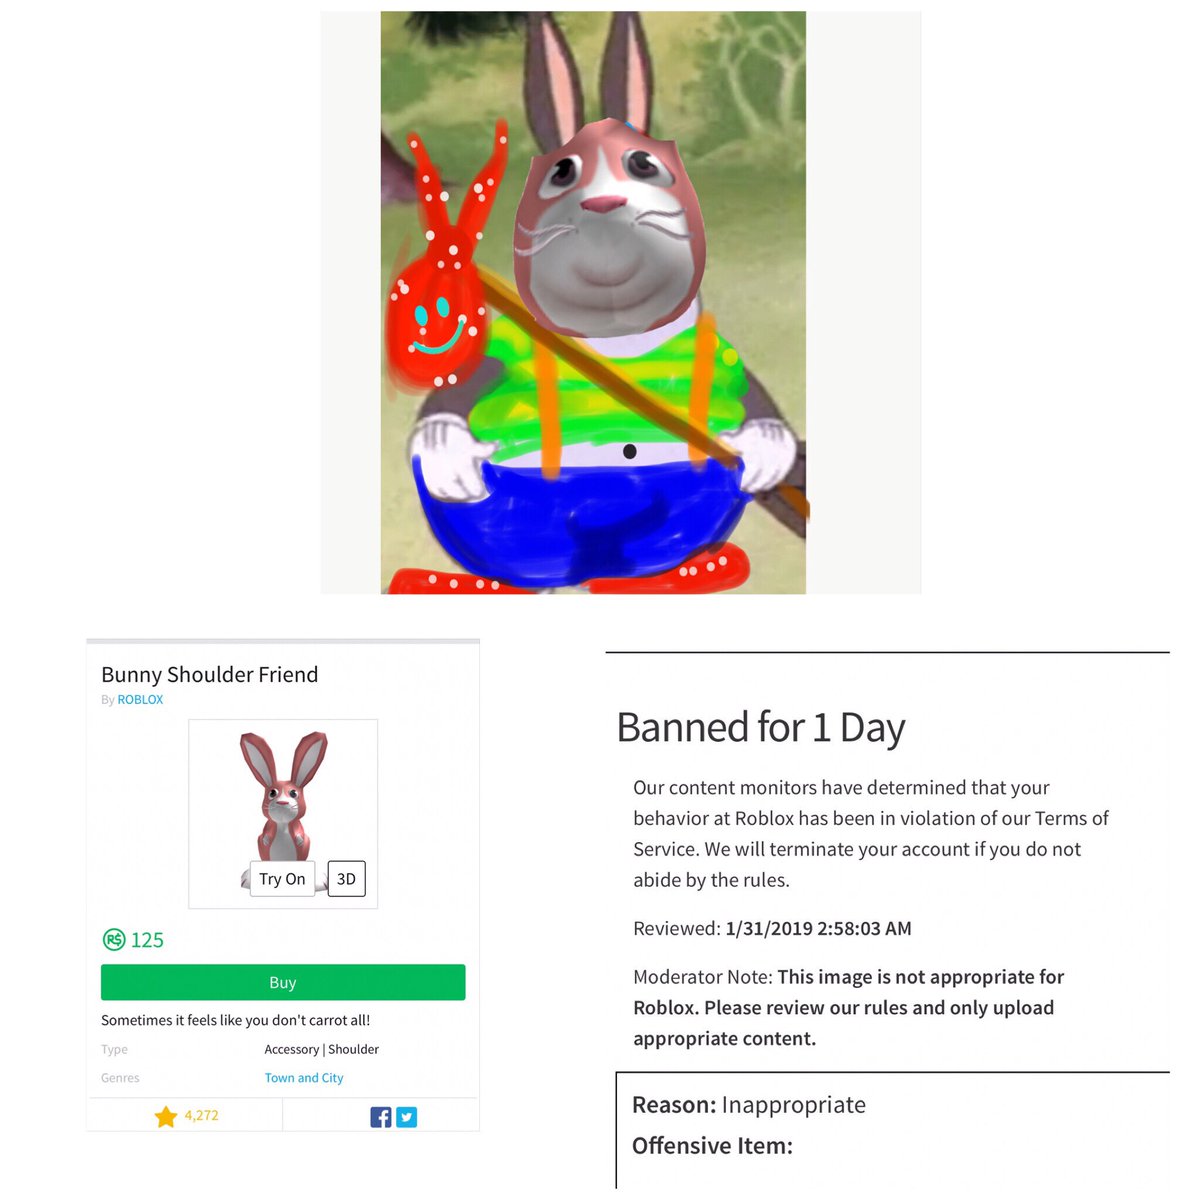 Hello Entertainment Bloxyawards Bloxys Roblox On Twitter Roblox Fat Shames And Discriminates Against Diverse Plus Sized Images Of Body Positivity Bans Its Own Pink Bunny In T Shirt Collage Image Https T Co Ikc9rojtxk - hello t shirt roblox